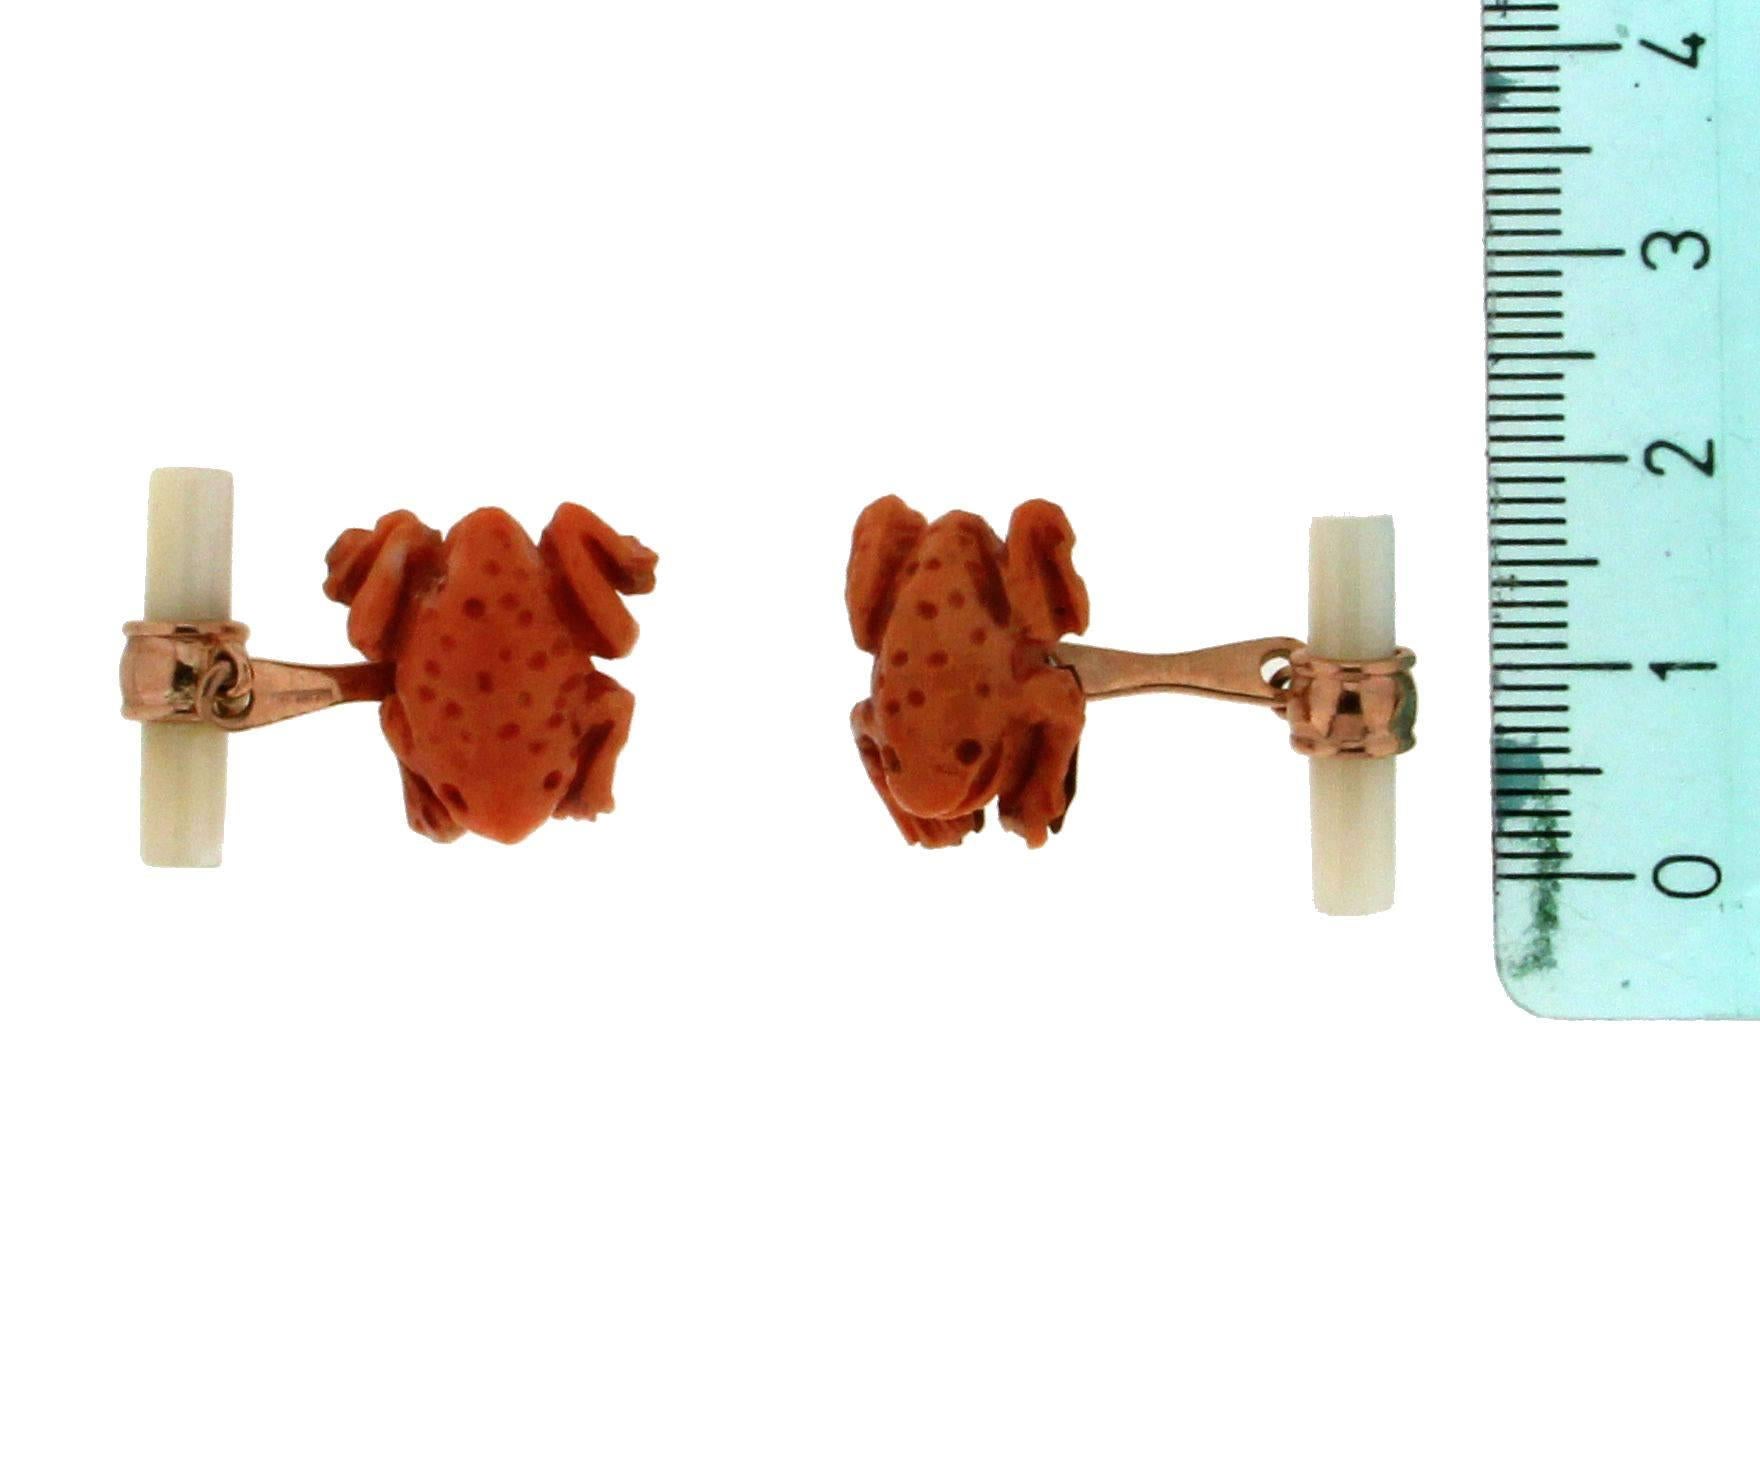 A fun pair of frog cufflinks in coral and nacre 9kt yellow gold made of nacre shaped as a simply cylinder.